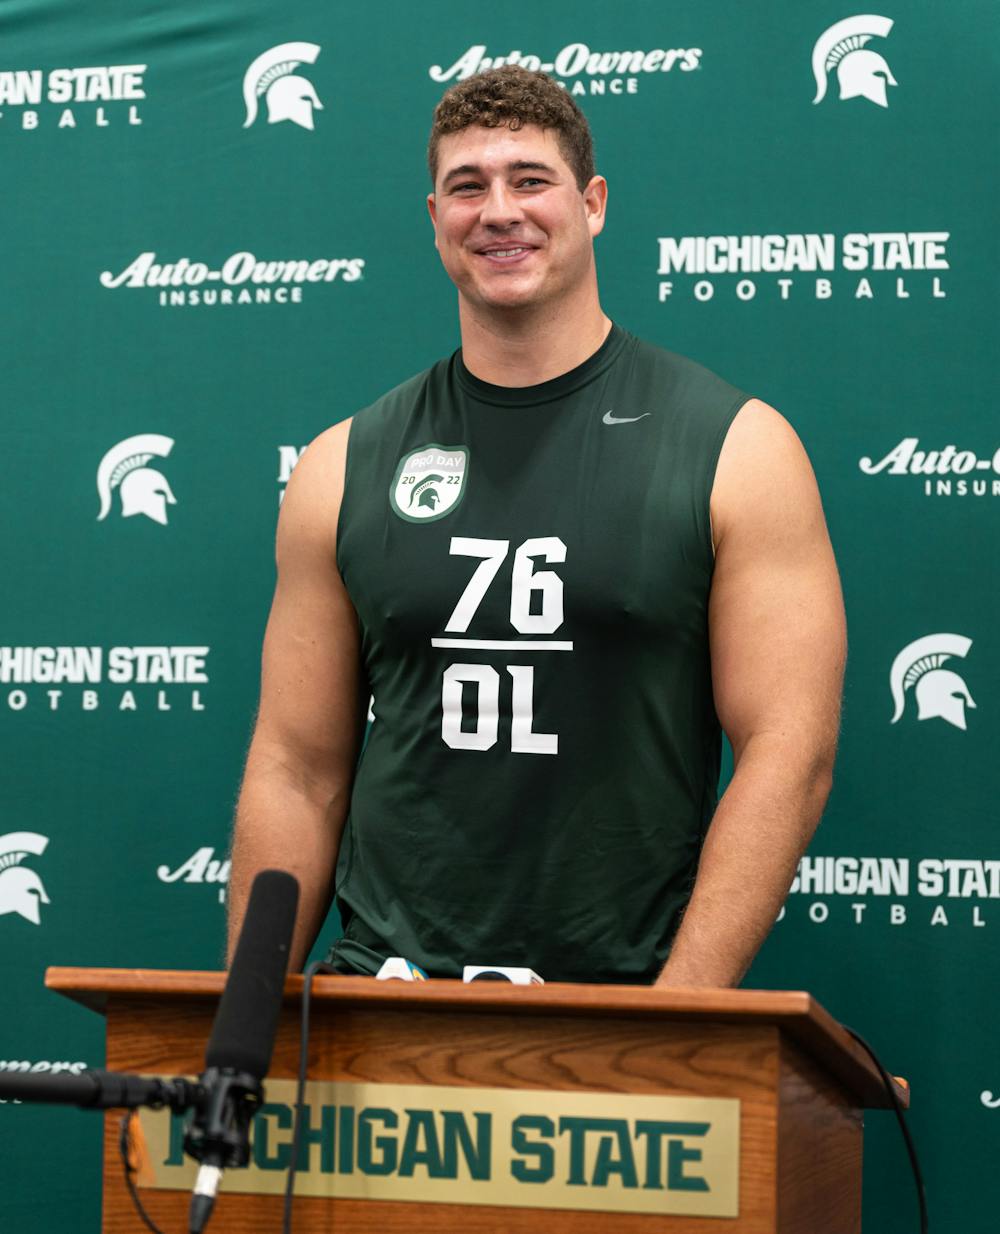 <p>When asked what he was trying to display for Pro Day, Michigan State graduate student AJ Arcuri said &quot;My athletic ability, my explosiveness with the jumps, my length, (and) versatility being able to play multiple positions,&quot; during a press conference on Mar. 16, 2022 in the Duffy Daugherty Indoor Football Building.</p>